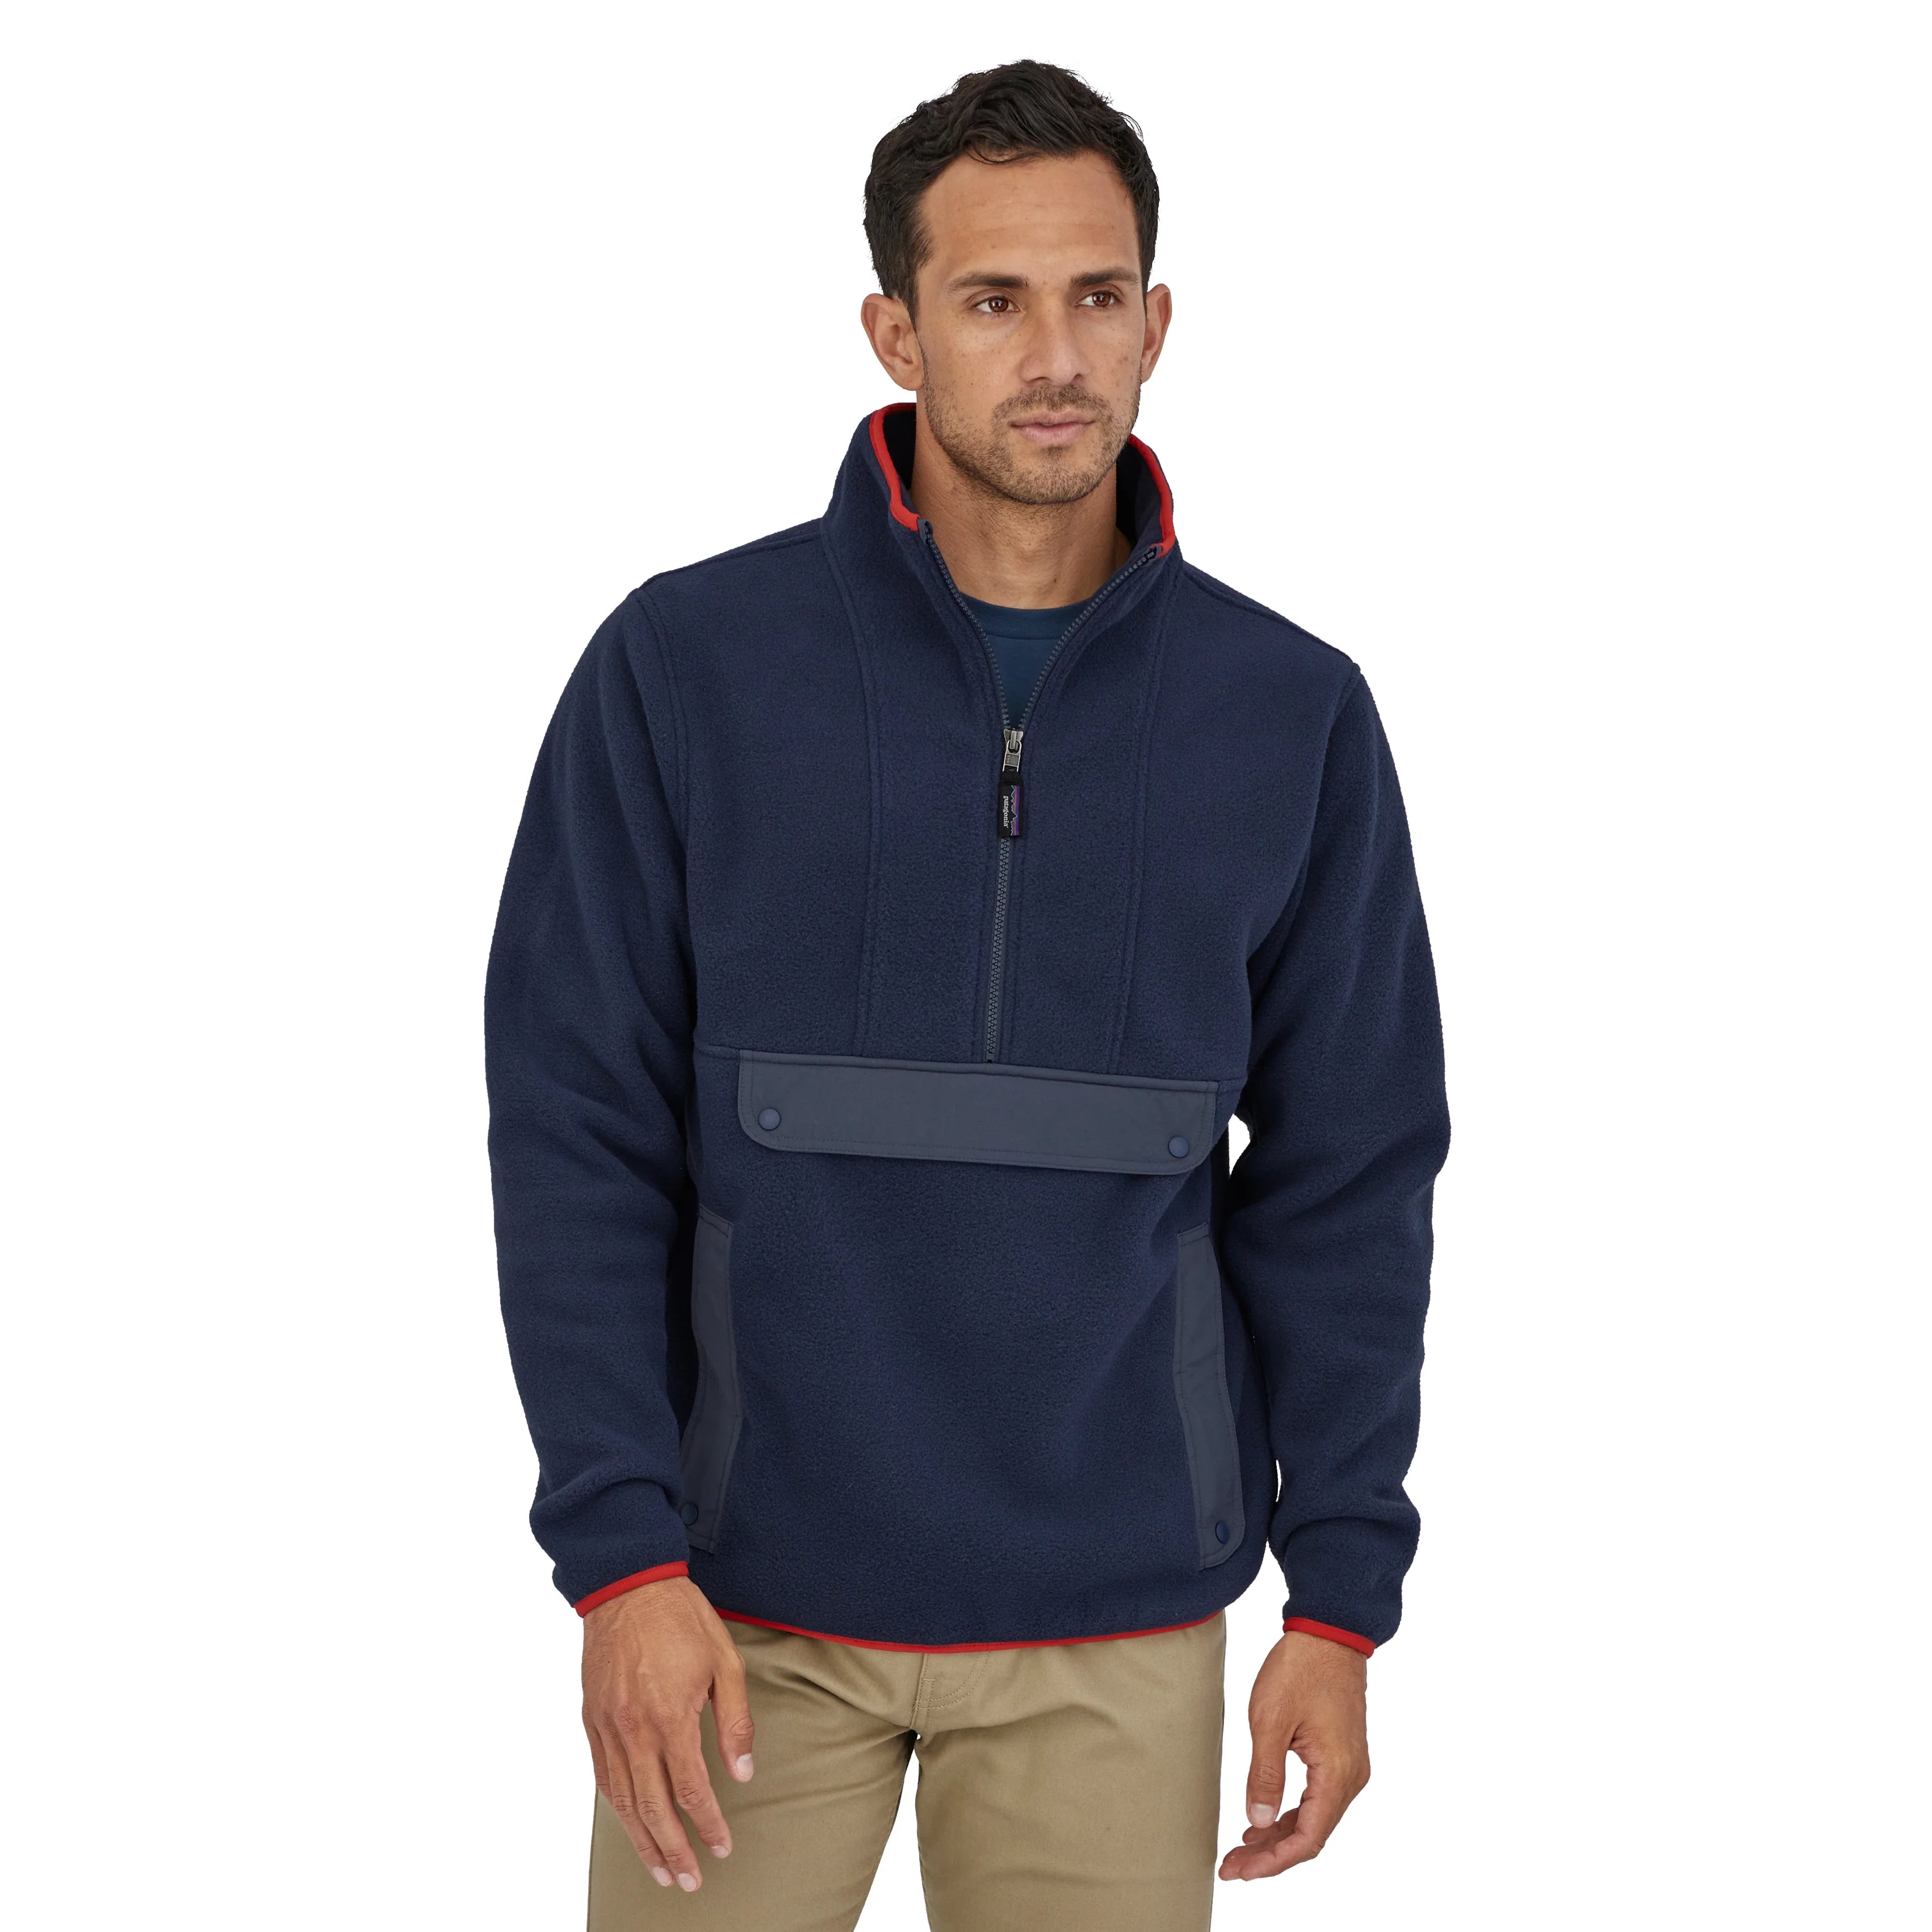 Patagonia Synch Anorak in New Navy.